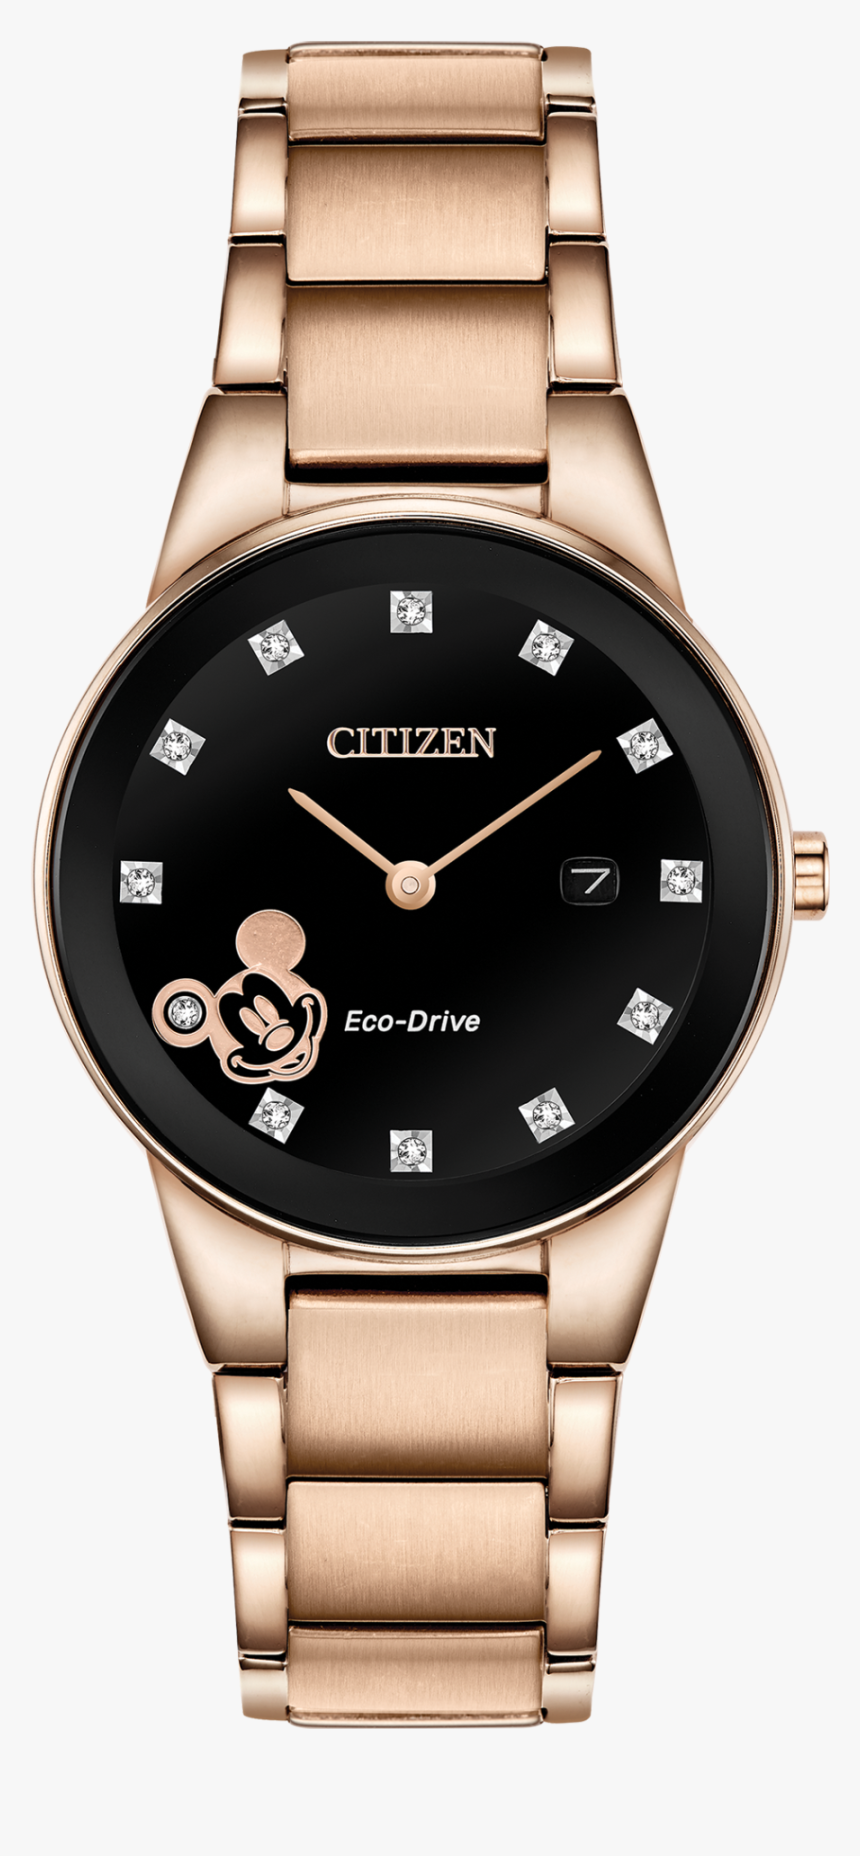 Mickey Mouse Main View - Citizen Mickey Mouse Watch, HD Png Download, Free Download